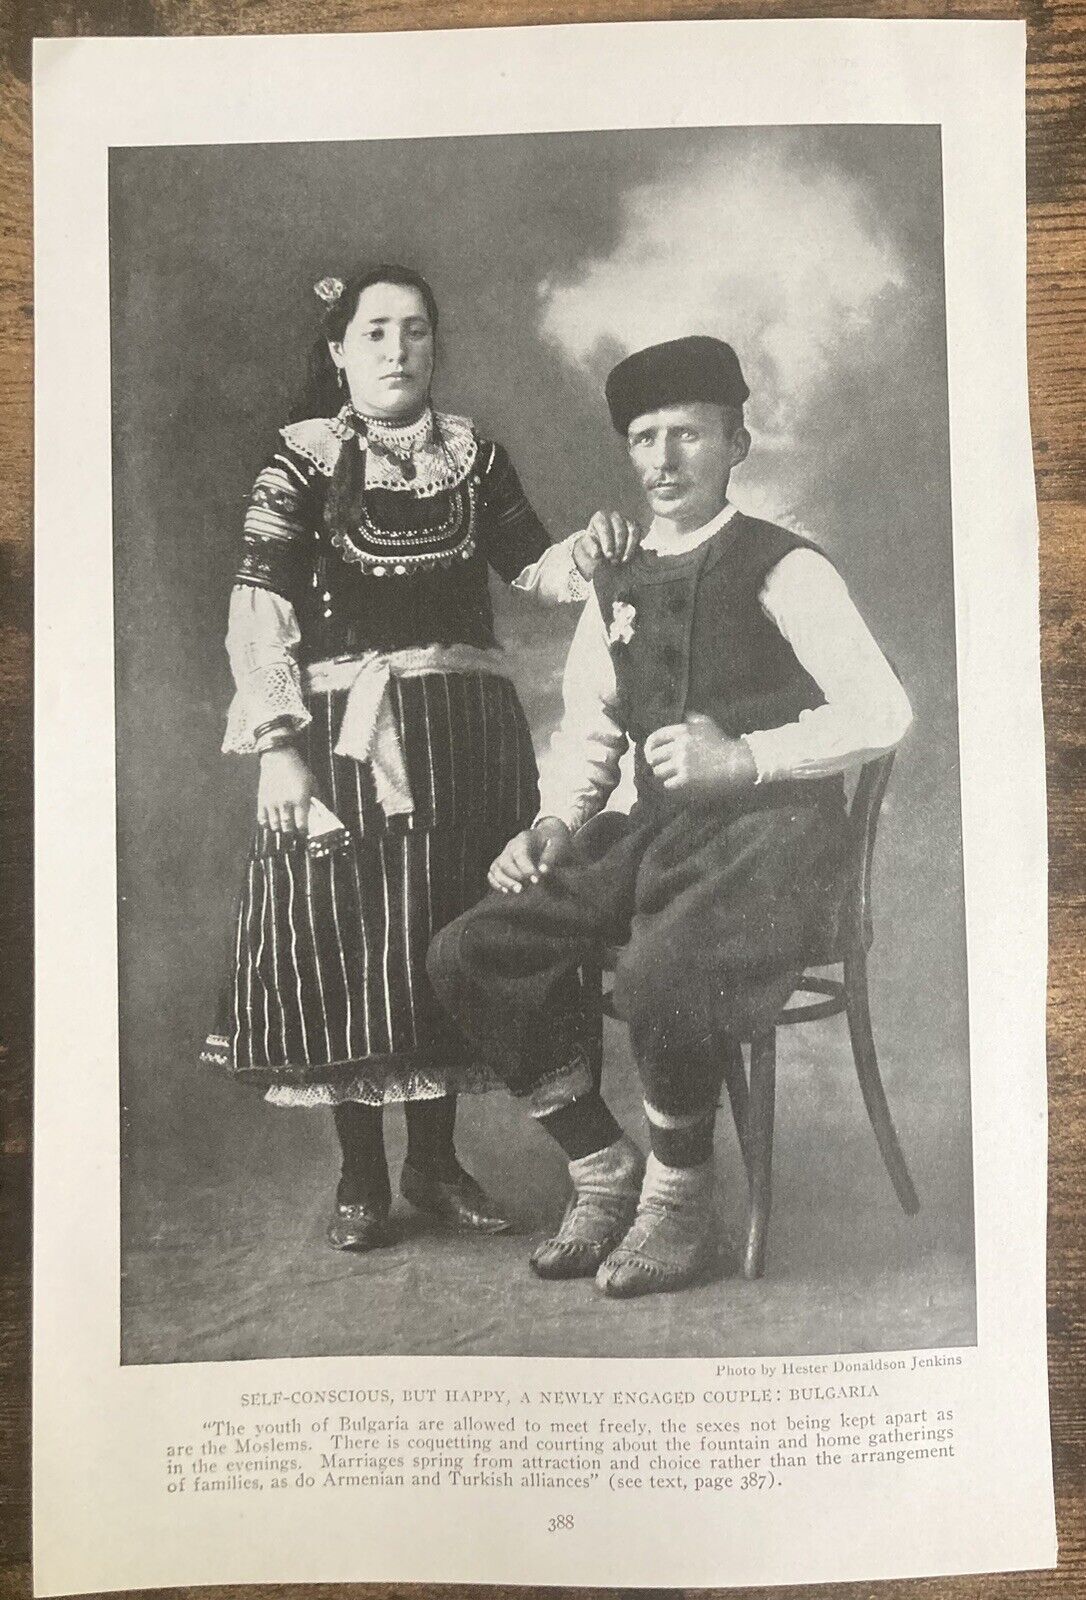 Book Clipping Photo Bulgarian Couple Newly Engaged 1915